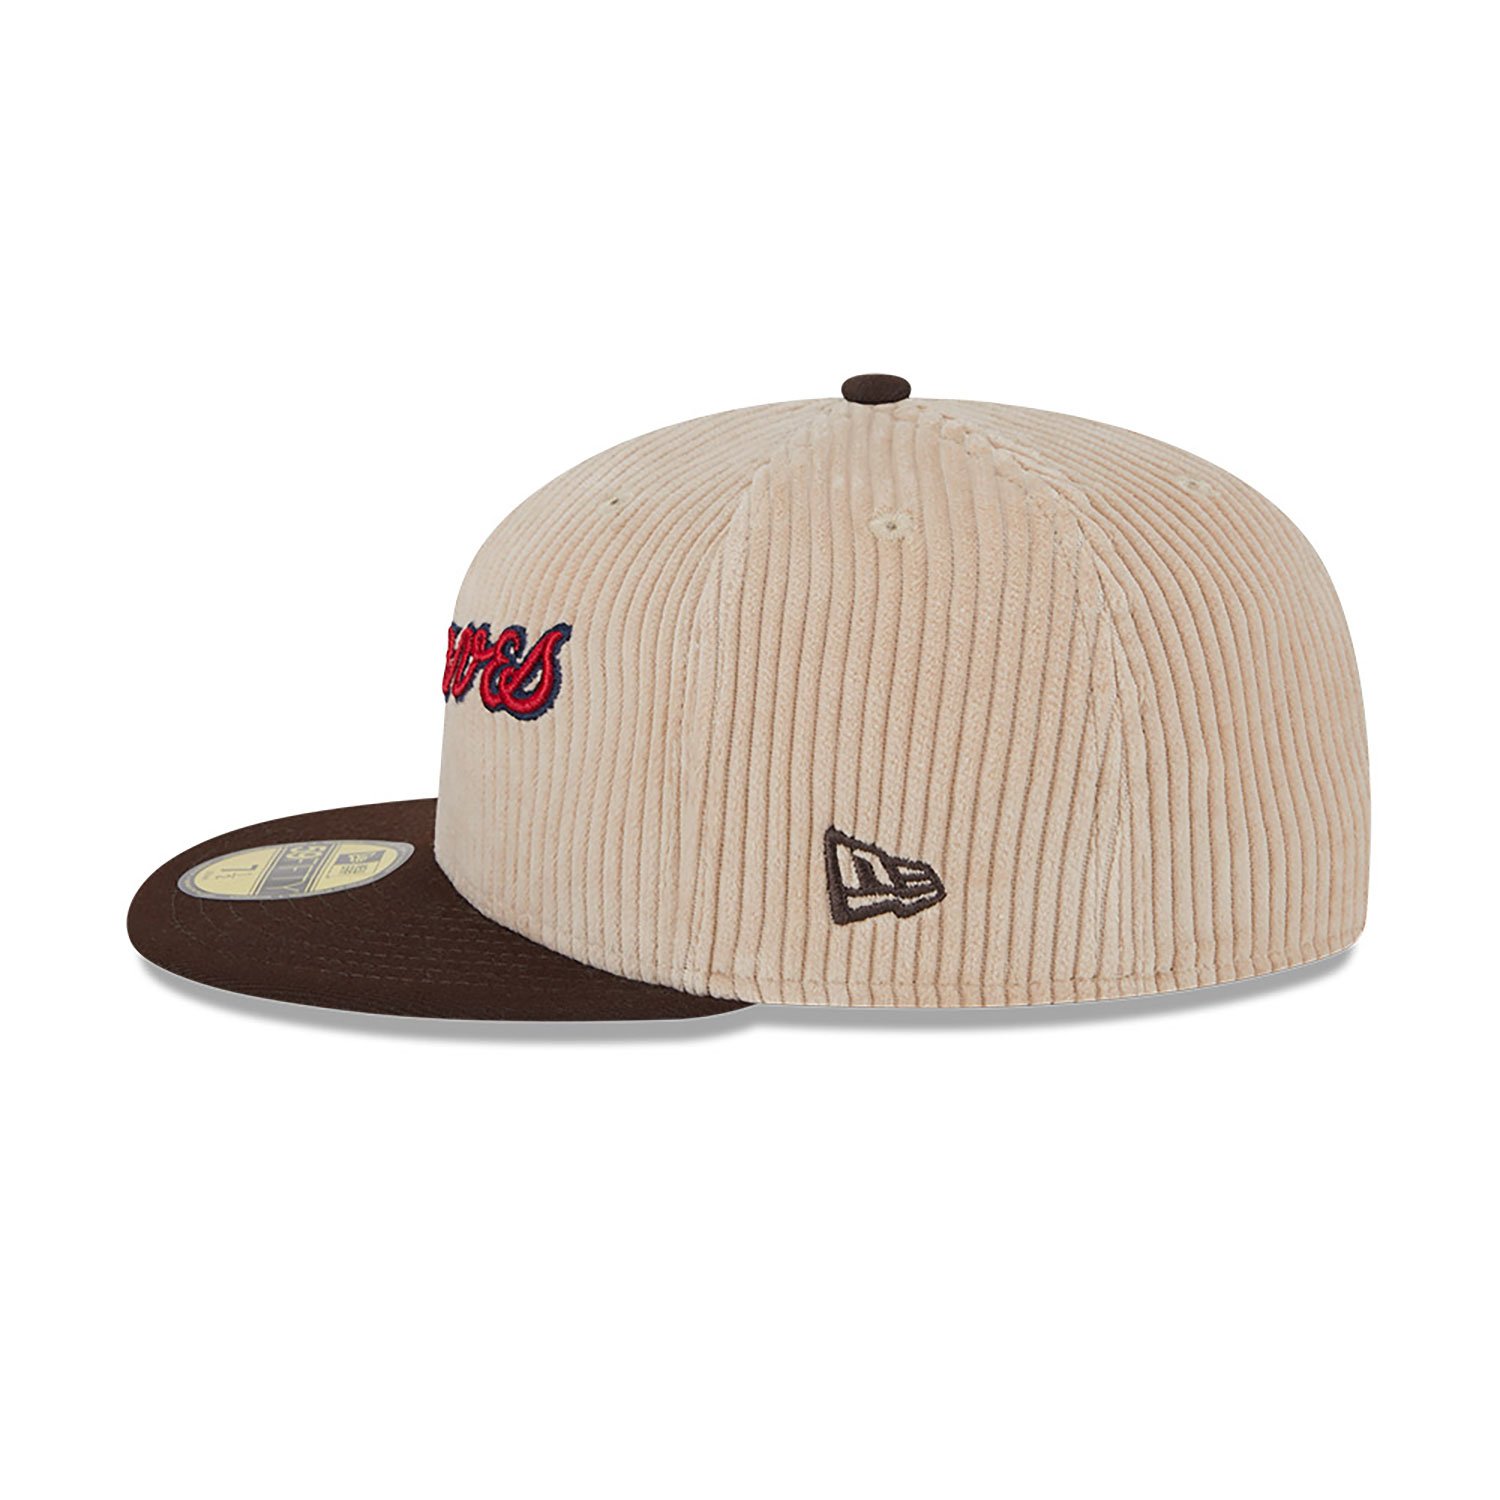 Atlanta Braves Fall Cord Beige 59FIFTY Fitted Cap